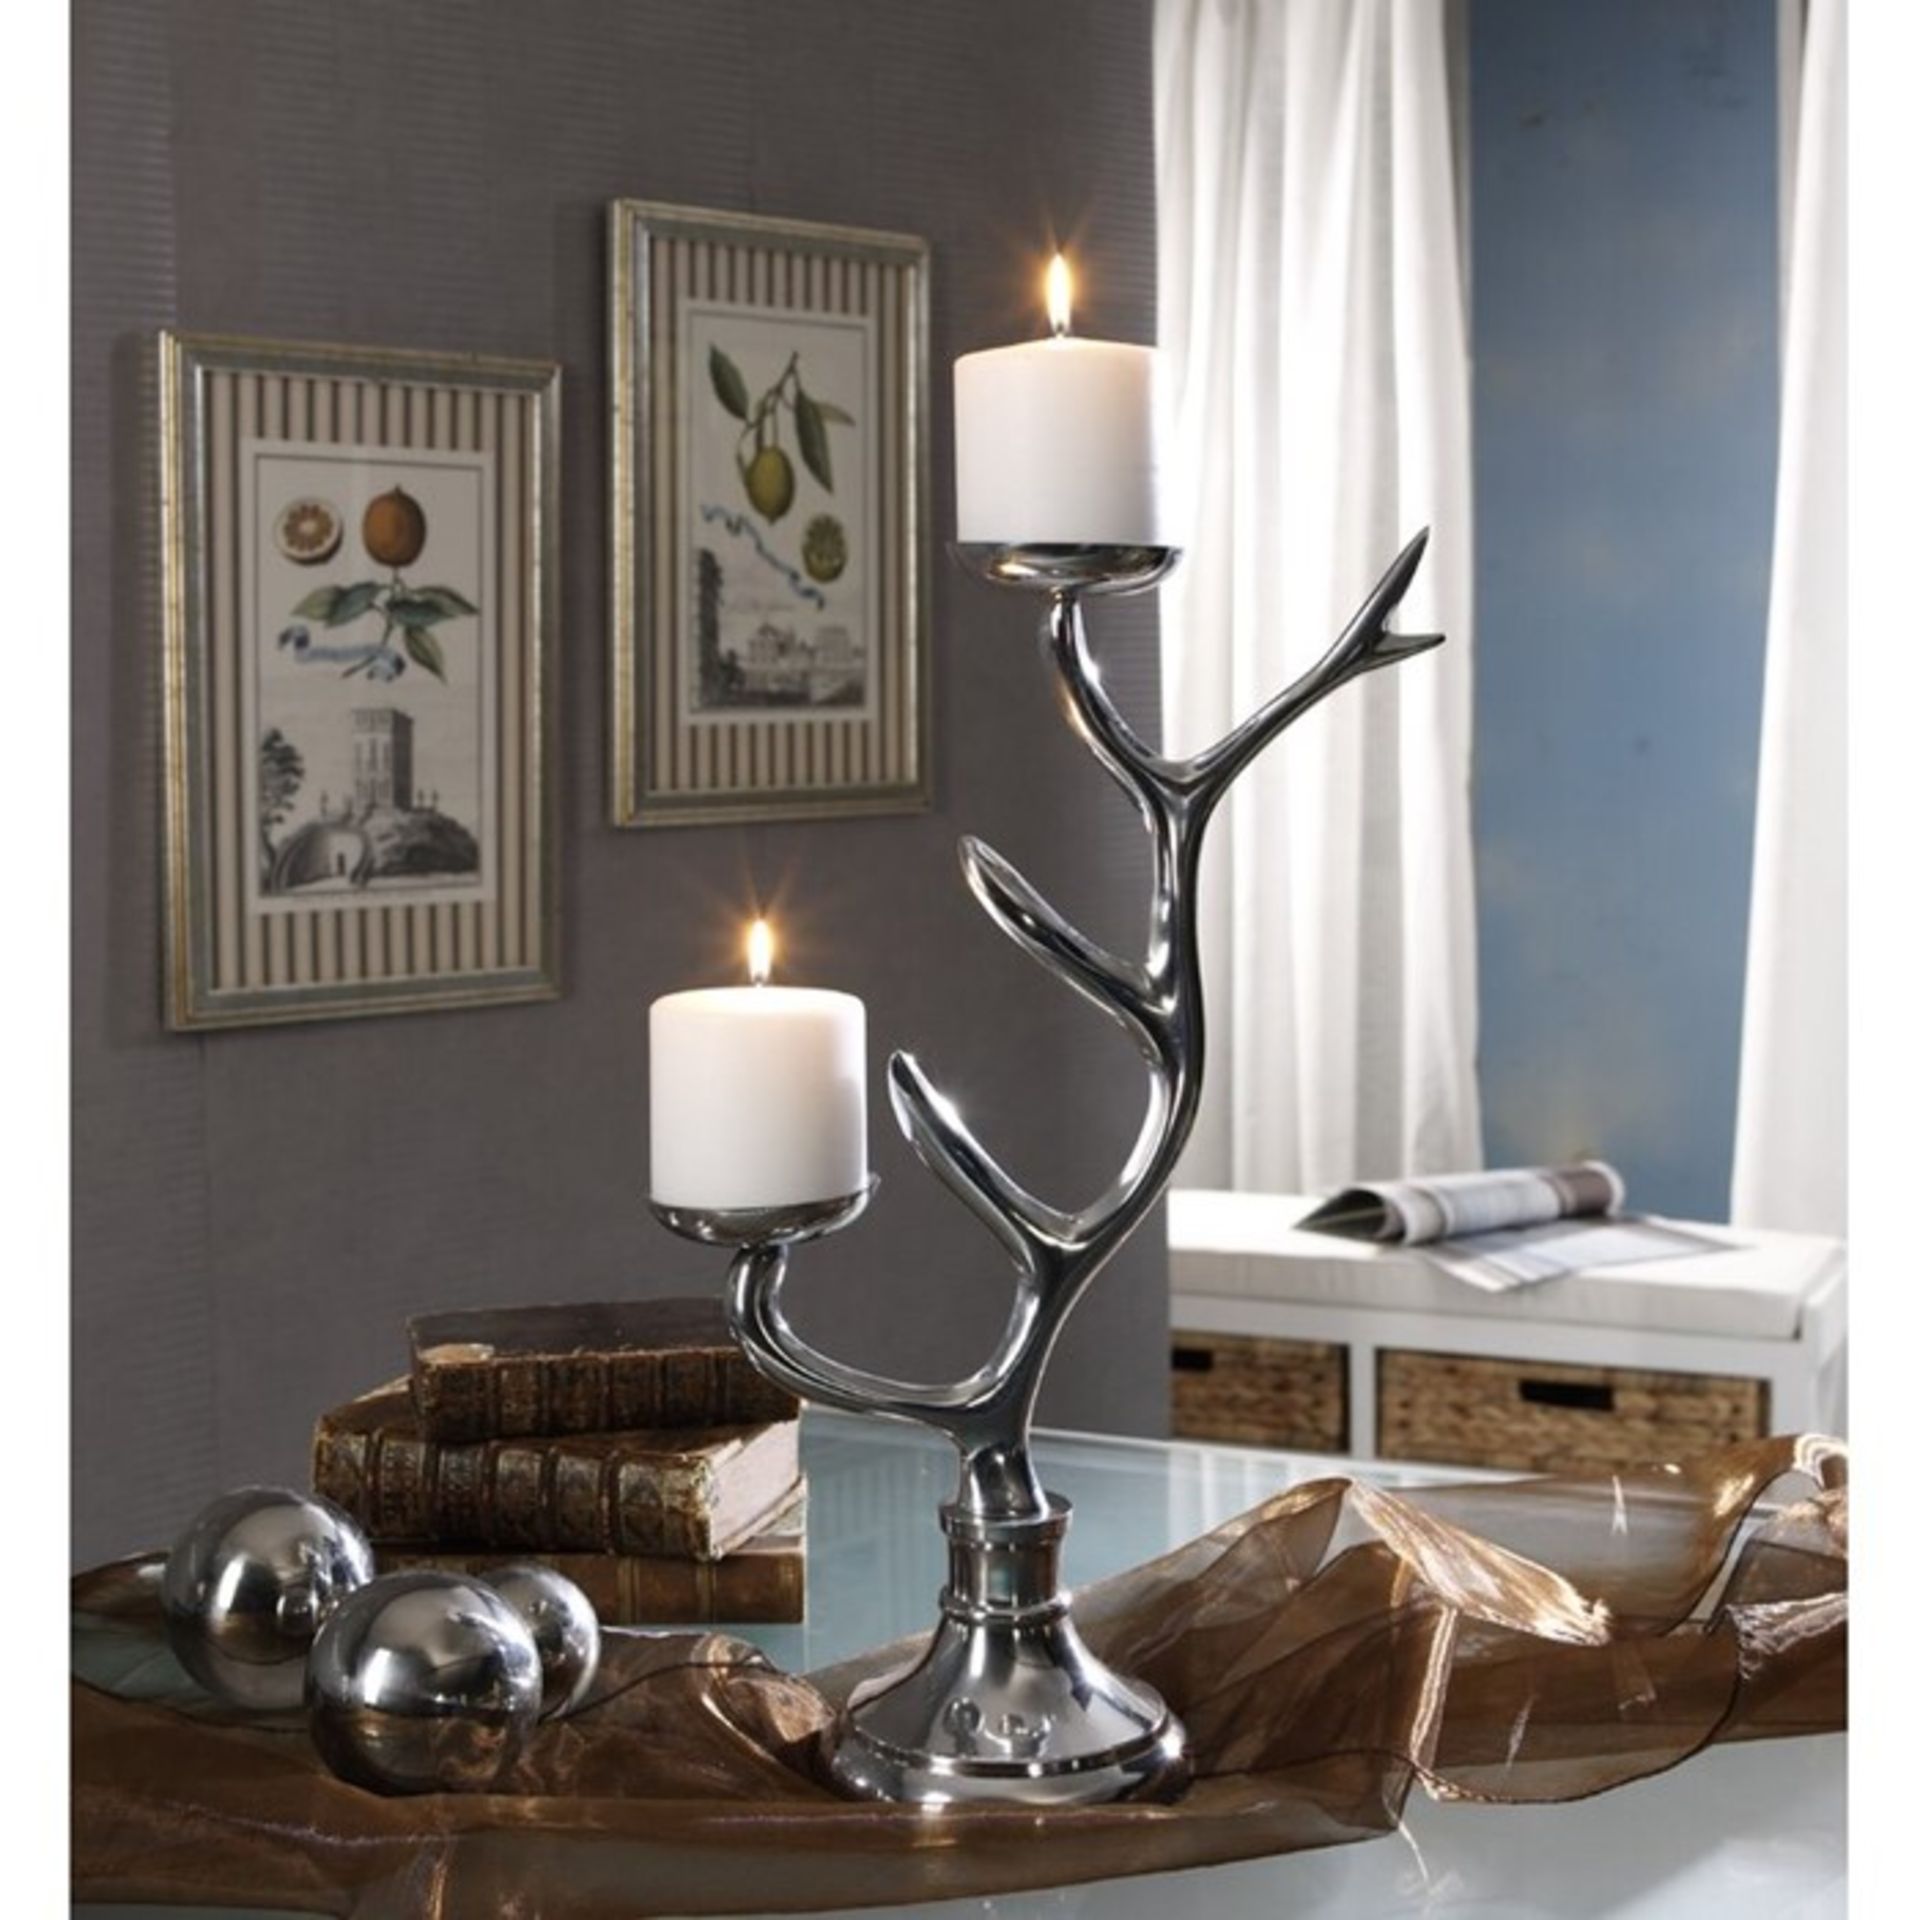 Marlow Home Co., Tree Table Candle Holder RRP £49.99 (ATRR1006 - 16648/24) 4C